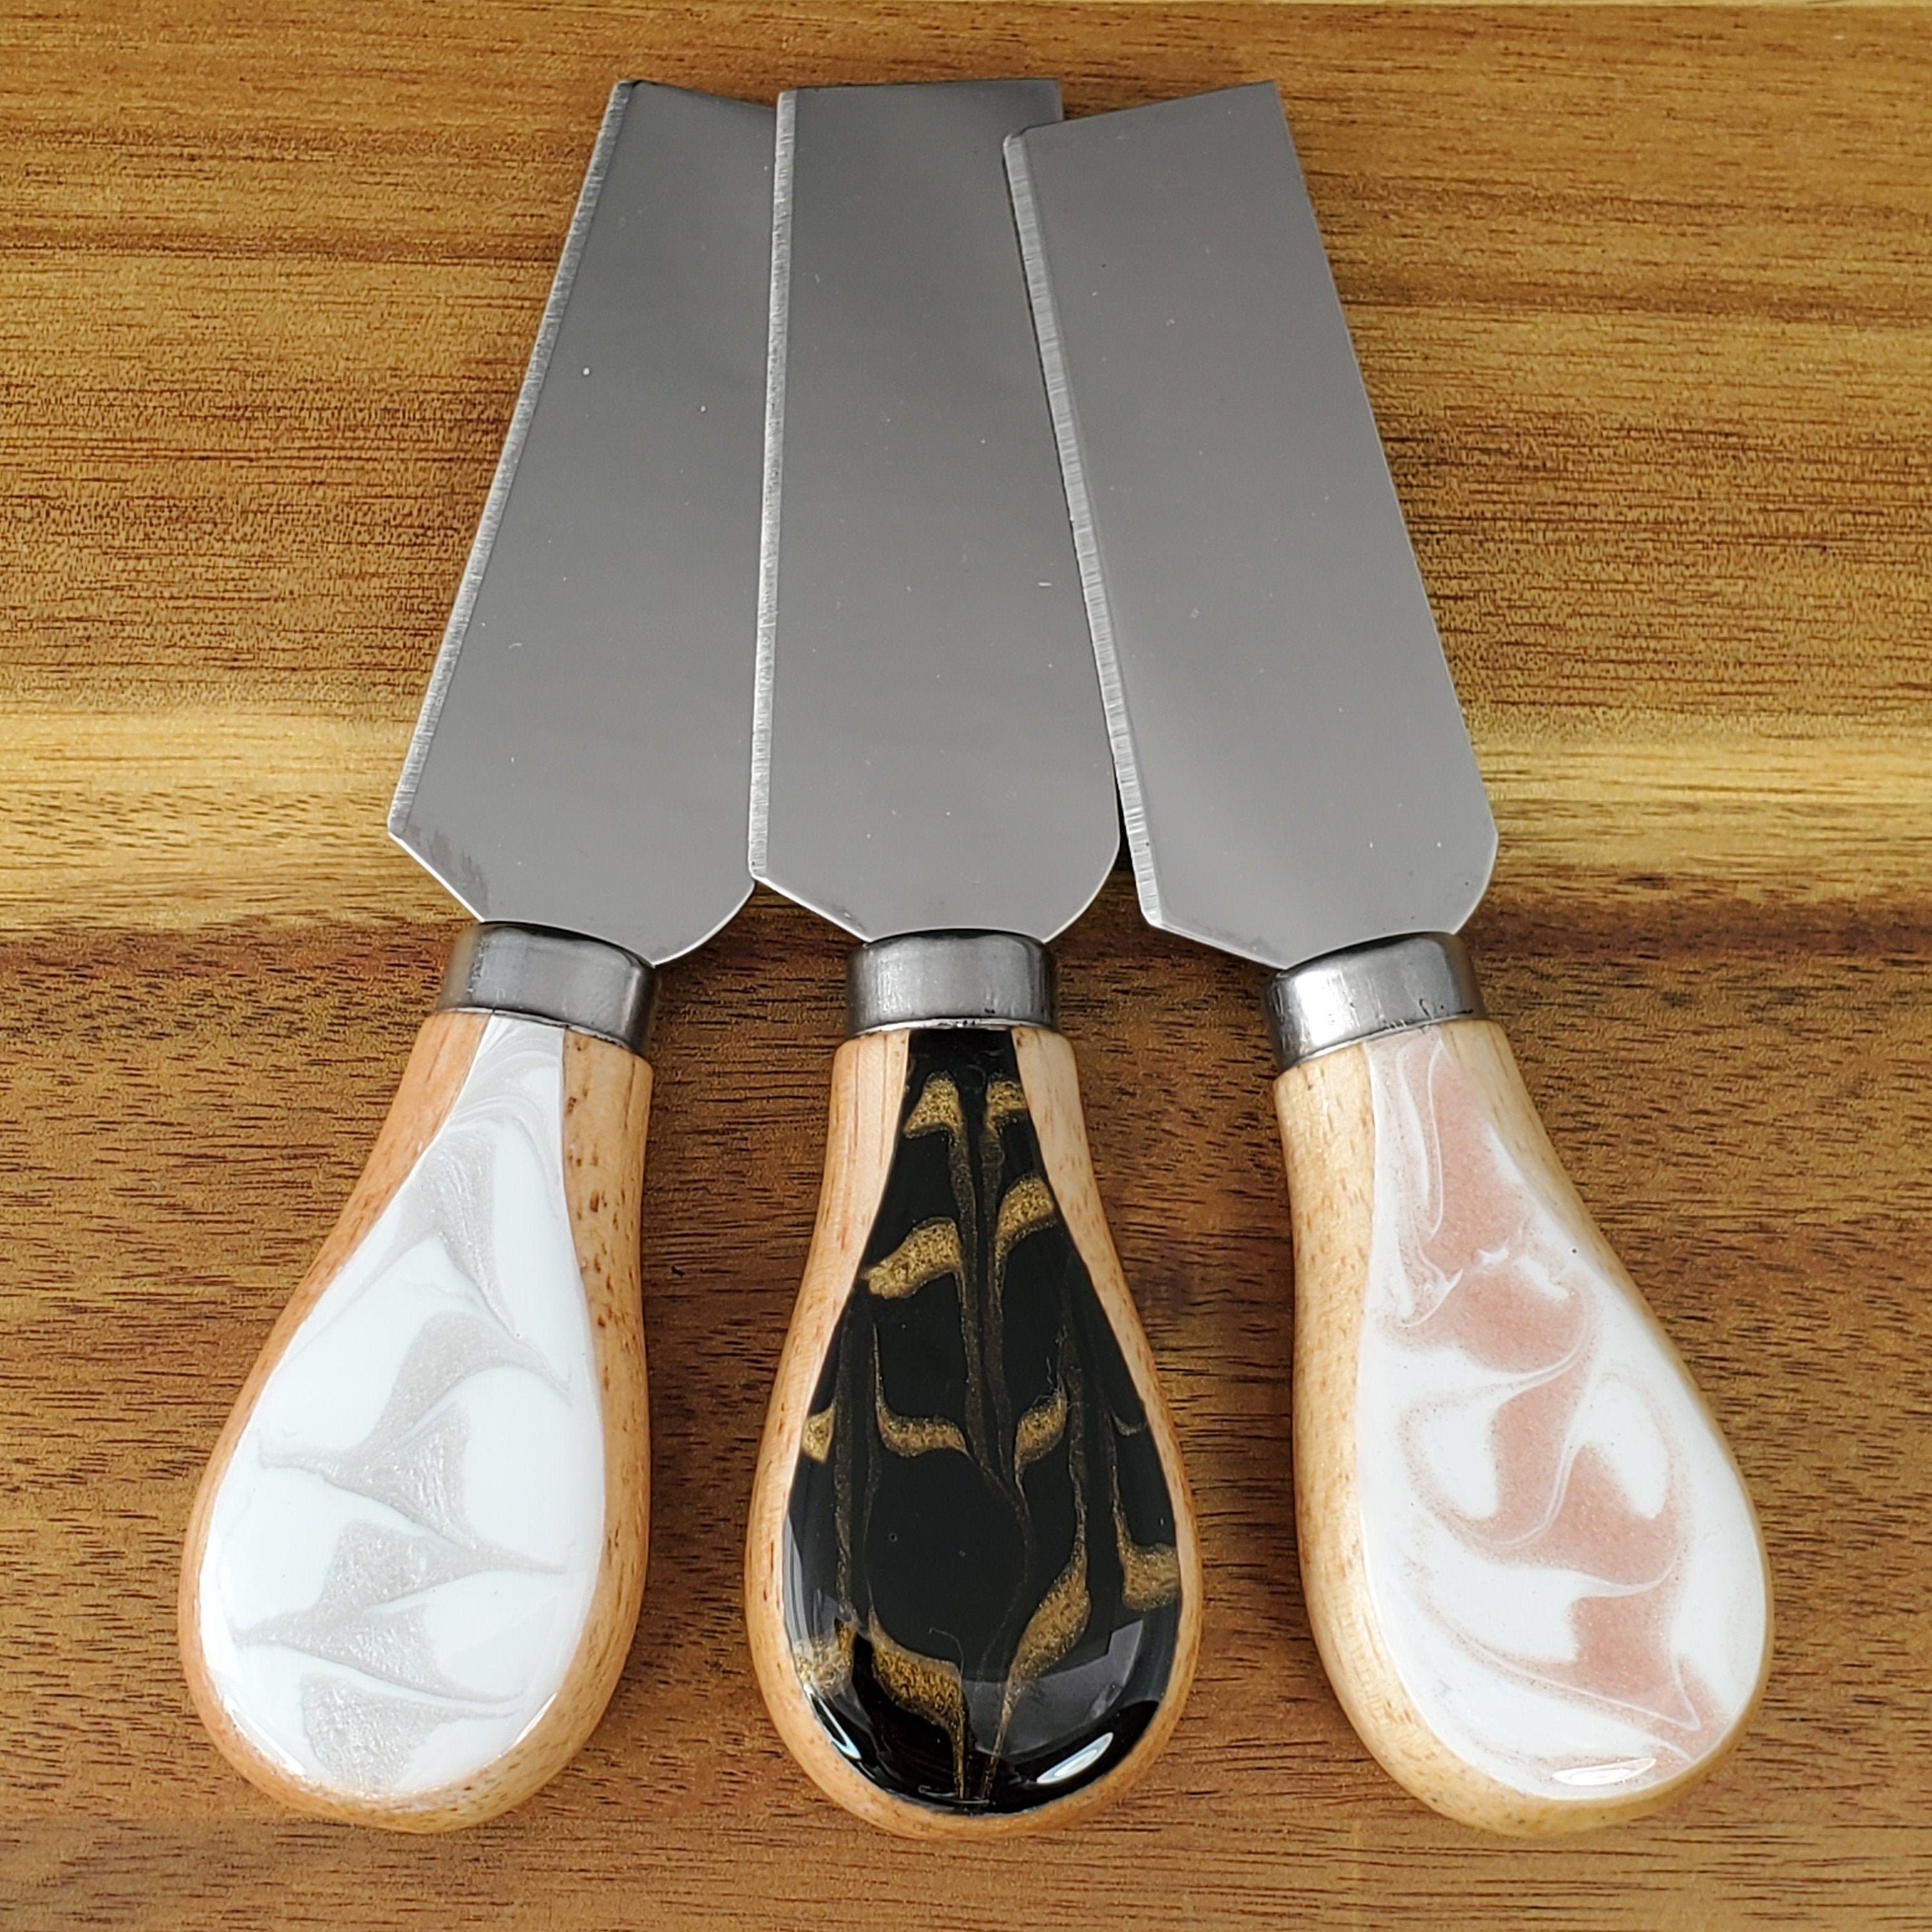 Cheese Knife Set With Gift Box, Deep Purple With Metallic Accents, 3 Design  Patterns, Resin Decorated, Perfect Gift 